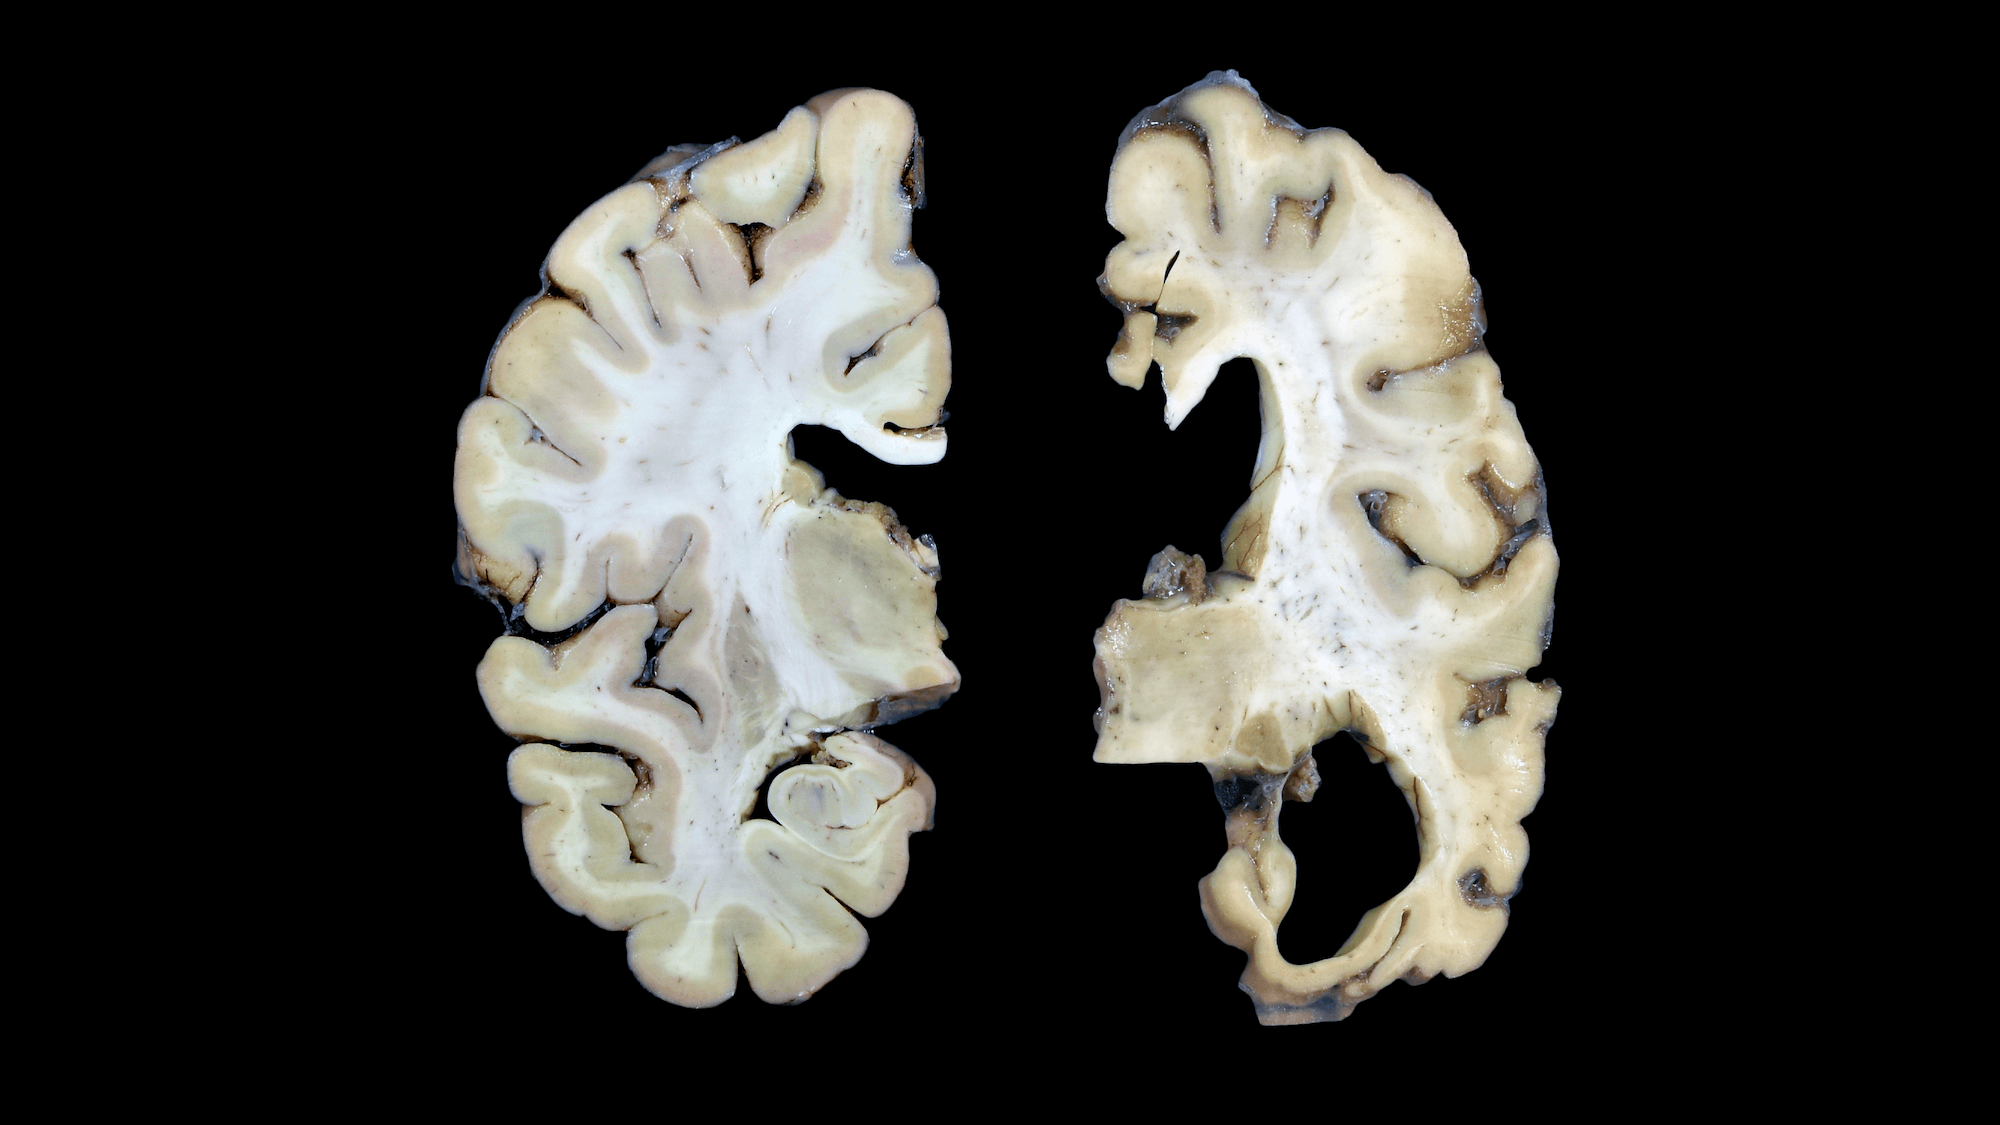 http://Sections%20of%20a%20healthy%20human%20brain%20(left)%20and%20a%20brain%20from%20a%20patient%20with%20Alzheimer’s%20disease%20(right).